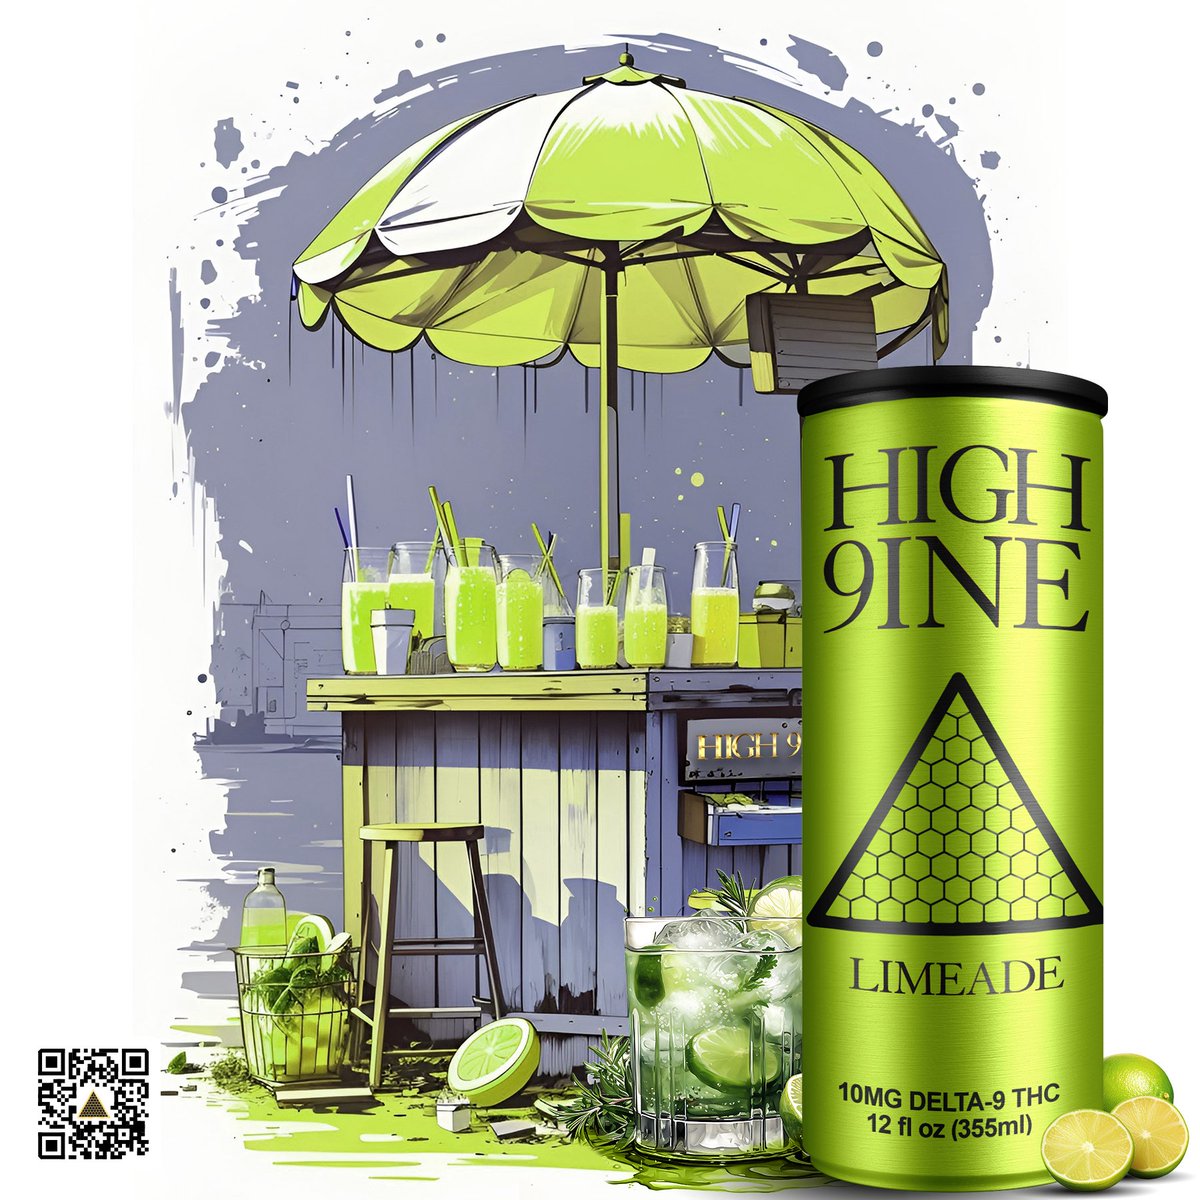 Beat the summer heat with a refreshing HIGH 9INE LIMEADE.

#drinkhigh9ine #cocktails #cocktail #stonerfam #weed #smoke #cannamom #summervibes #vibes #heat #smoke #fresh #delicious